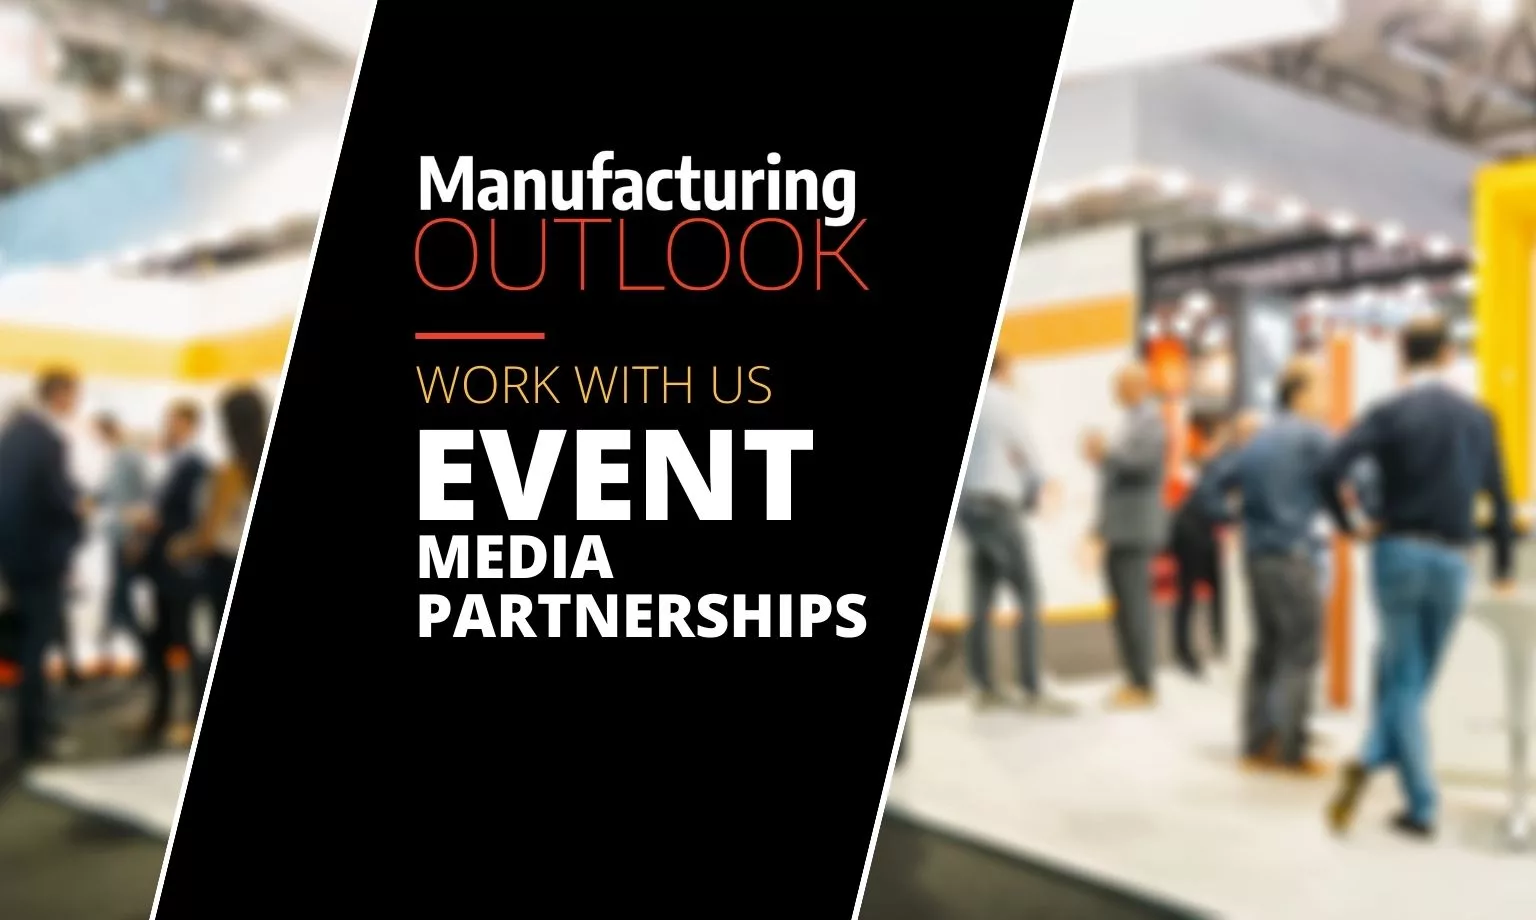 Featured Manufacturing Event Partnerships